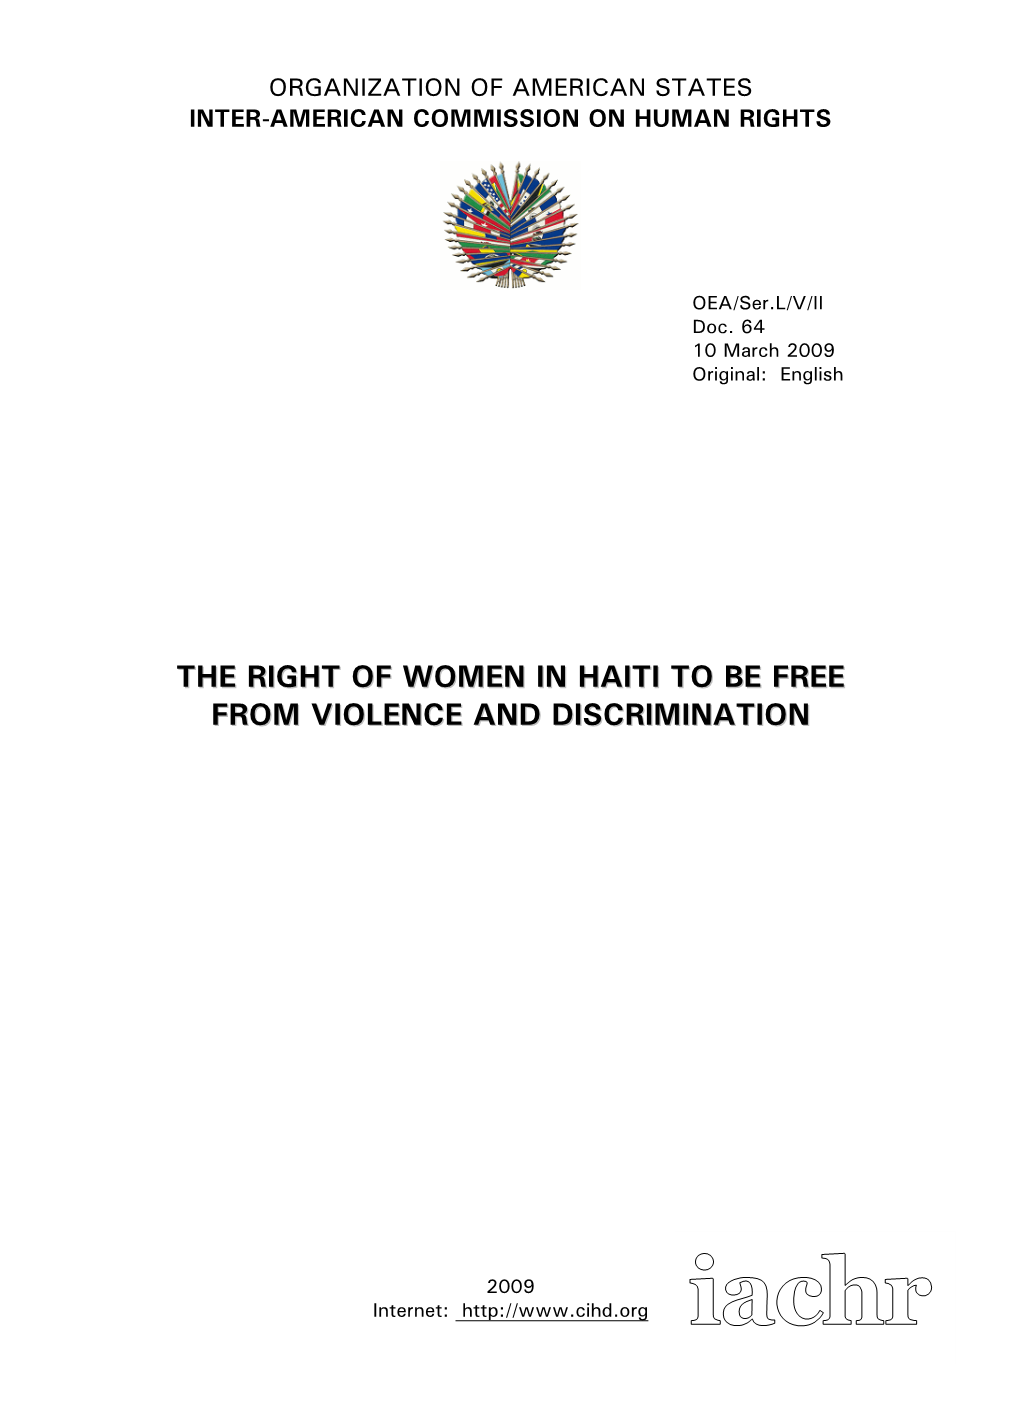 Discrimination and Violence Against Women and Girls in Haiti